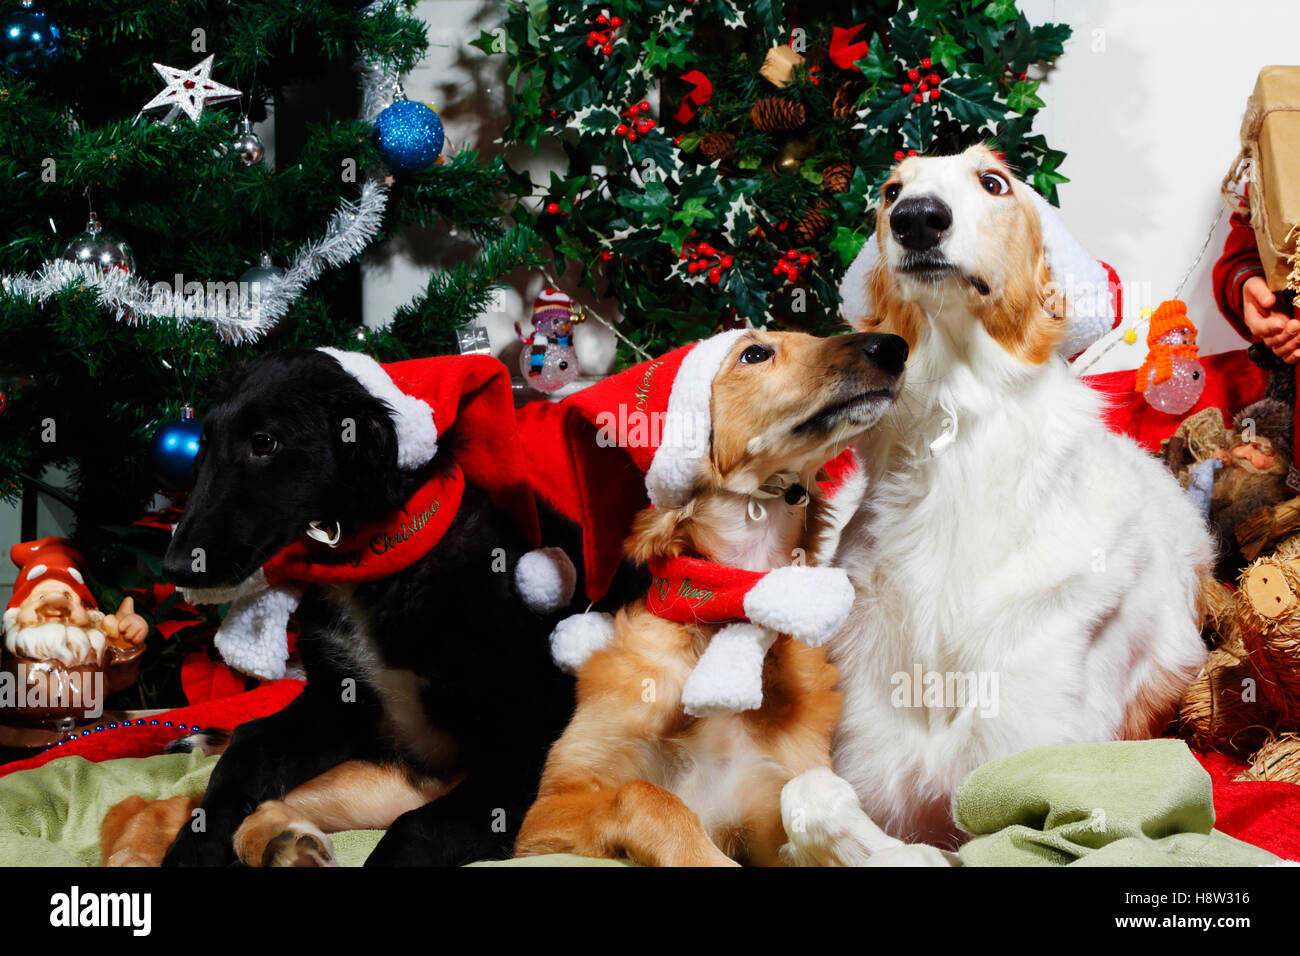 Puppies dressed as father-christmas with greetings Stock Photo